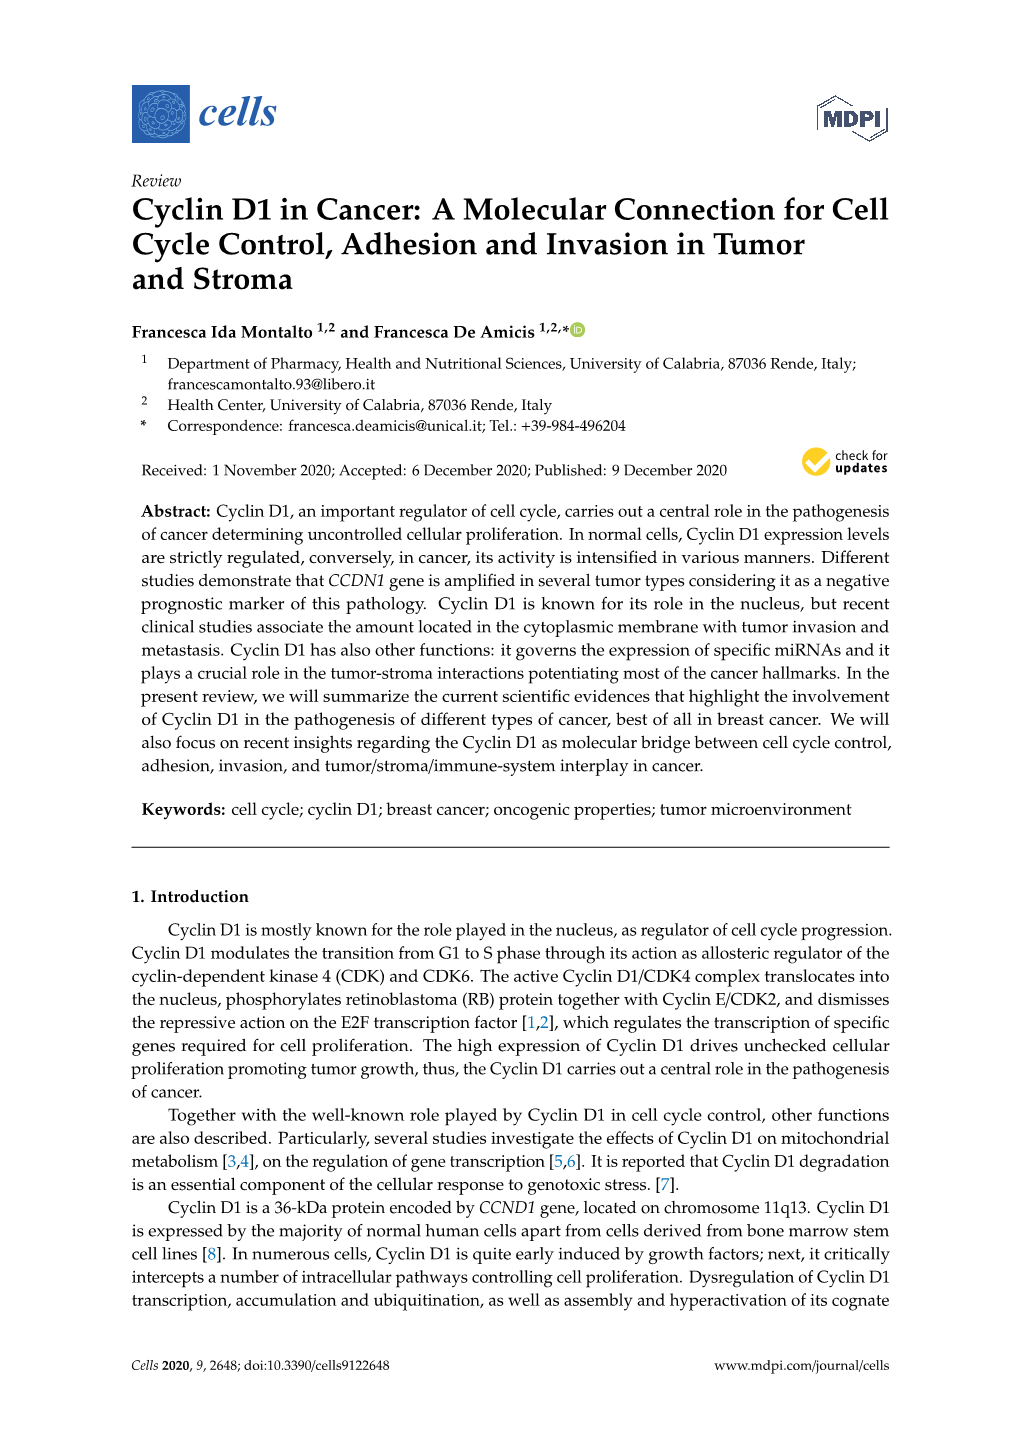 Cyclin D1 in Cancer: a Molecular Connection for Cell Cycle Control, Adhesion and Invasion in Tumor and Stroma